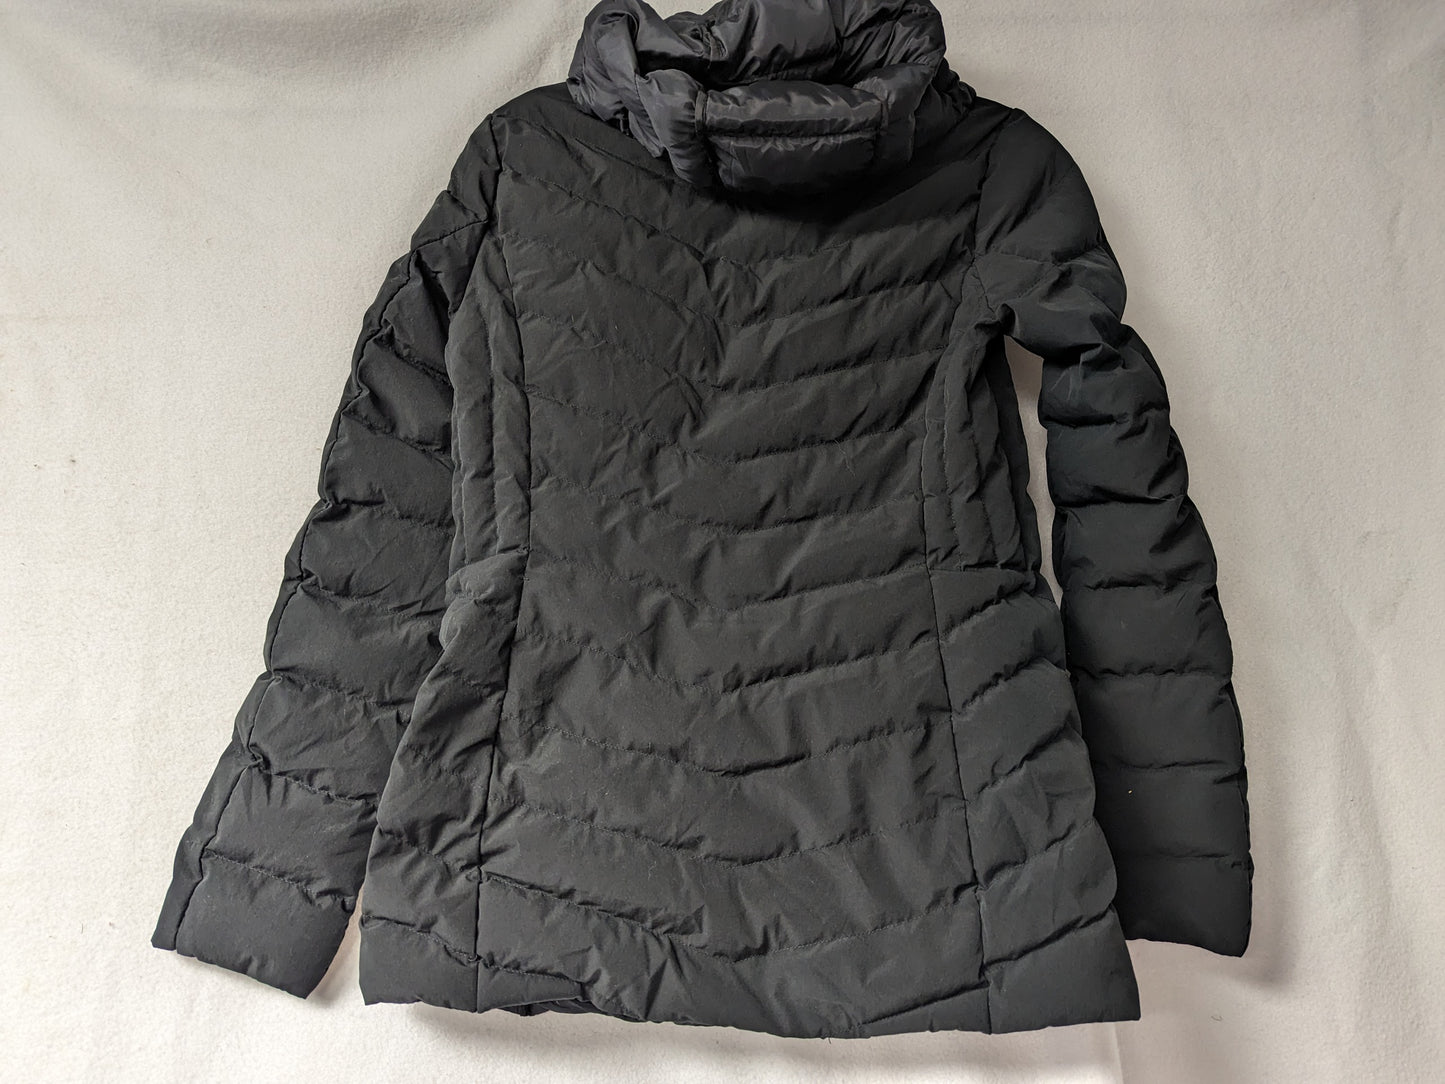 32 Degrees Heat Women's Hooded Puffer Jacket Coat Size Women Extra Small Color Black Condition Used